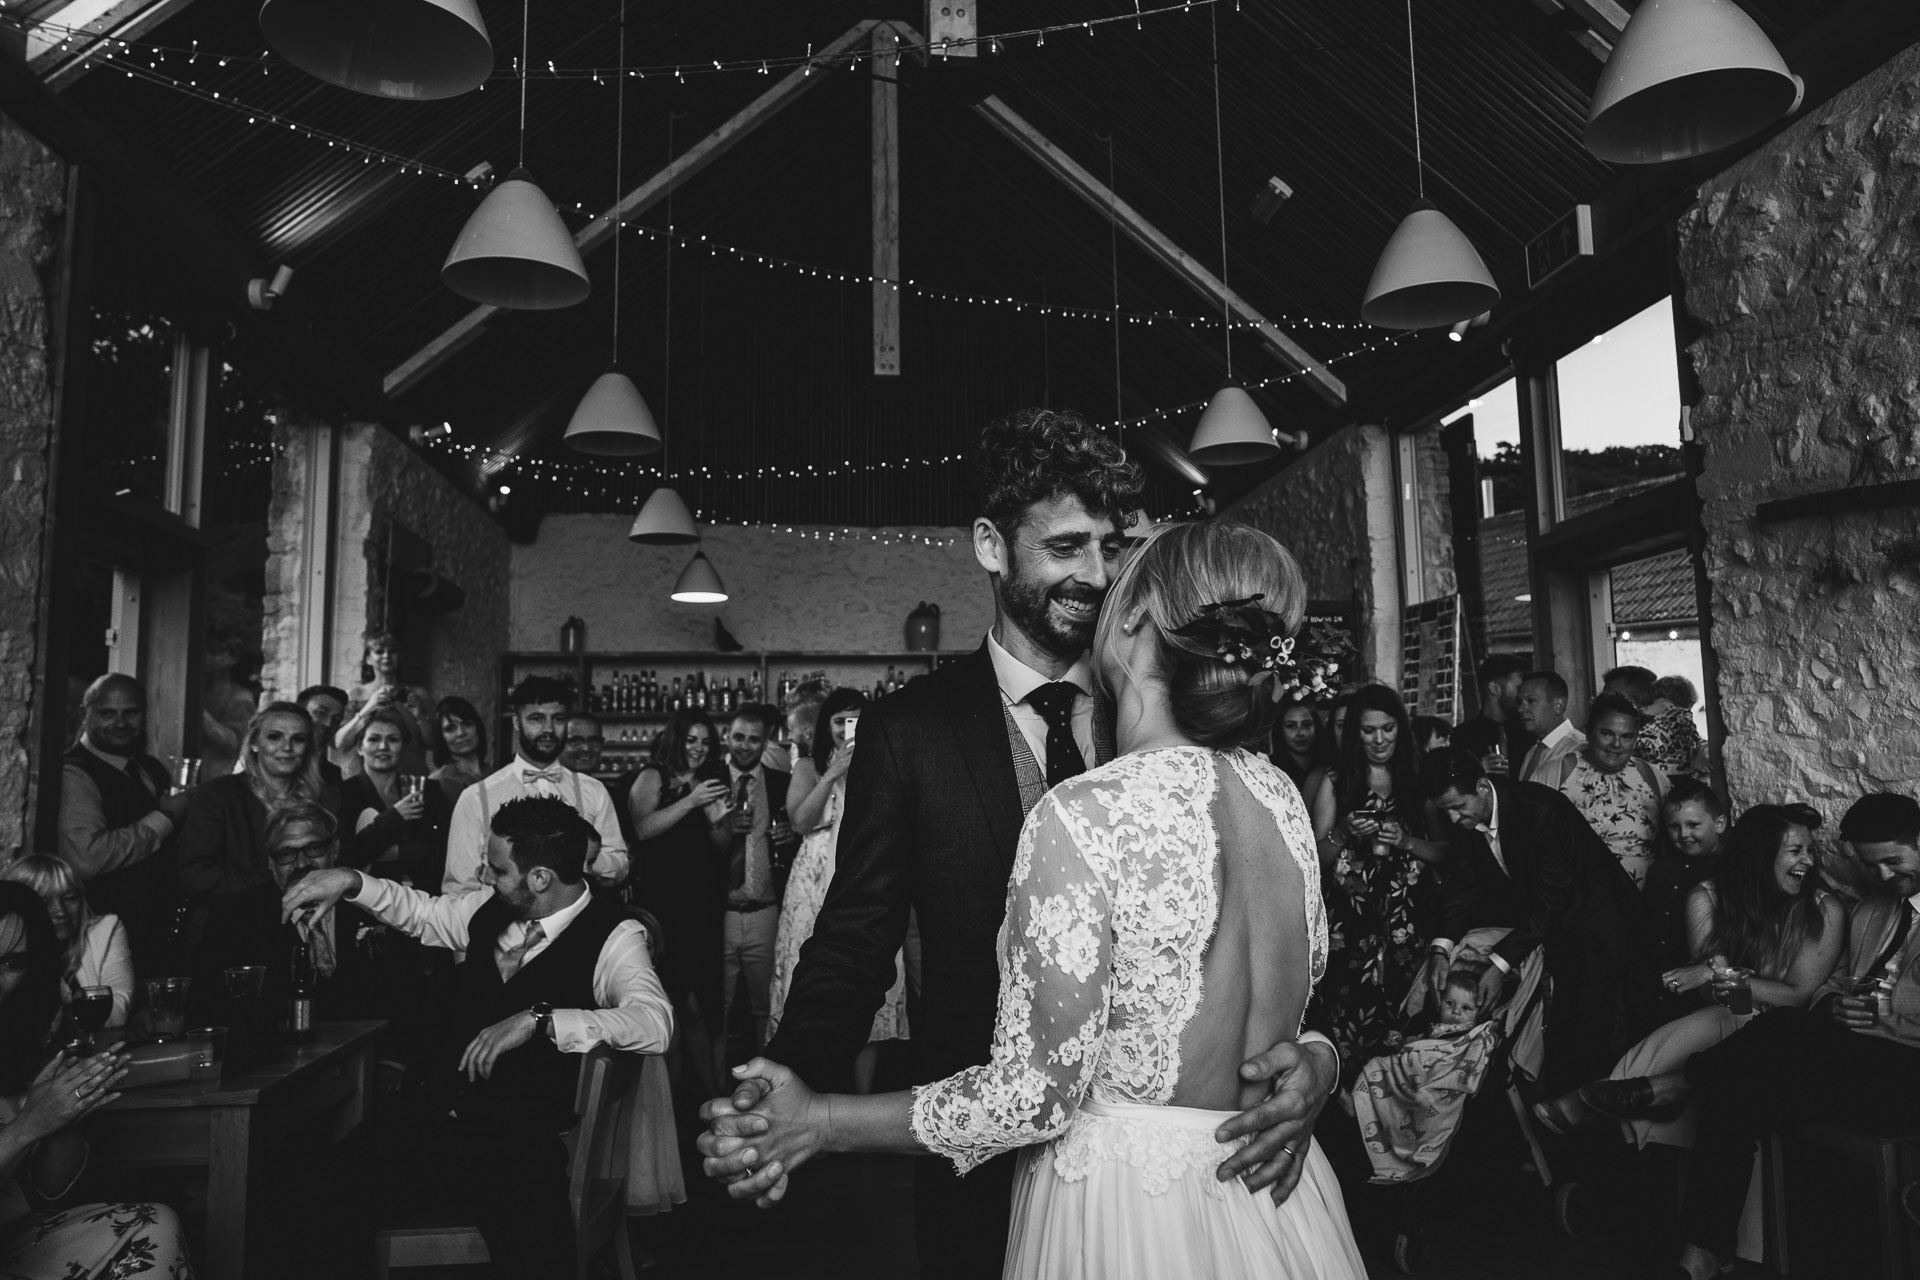 Bride and groom having their first dance in the barn